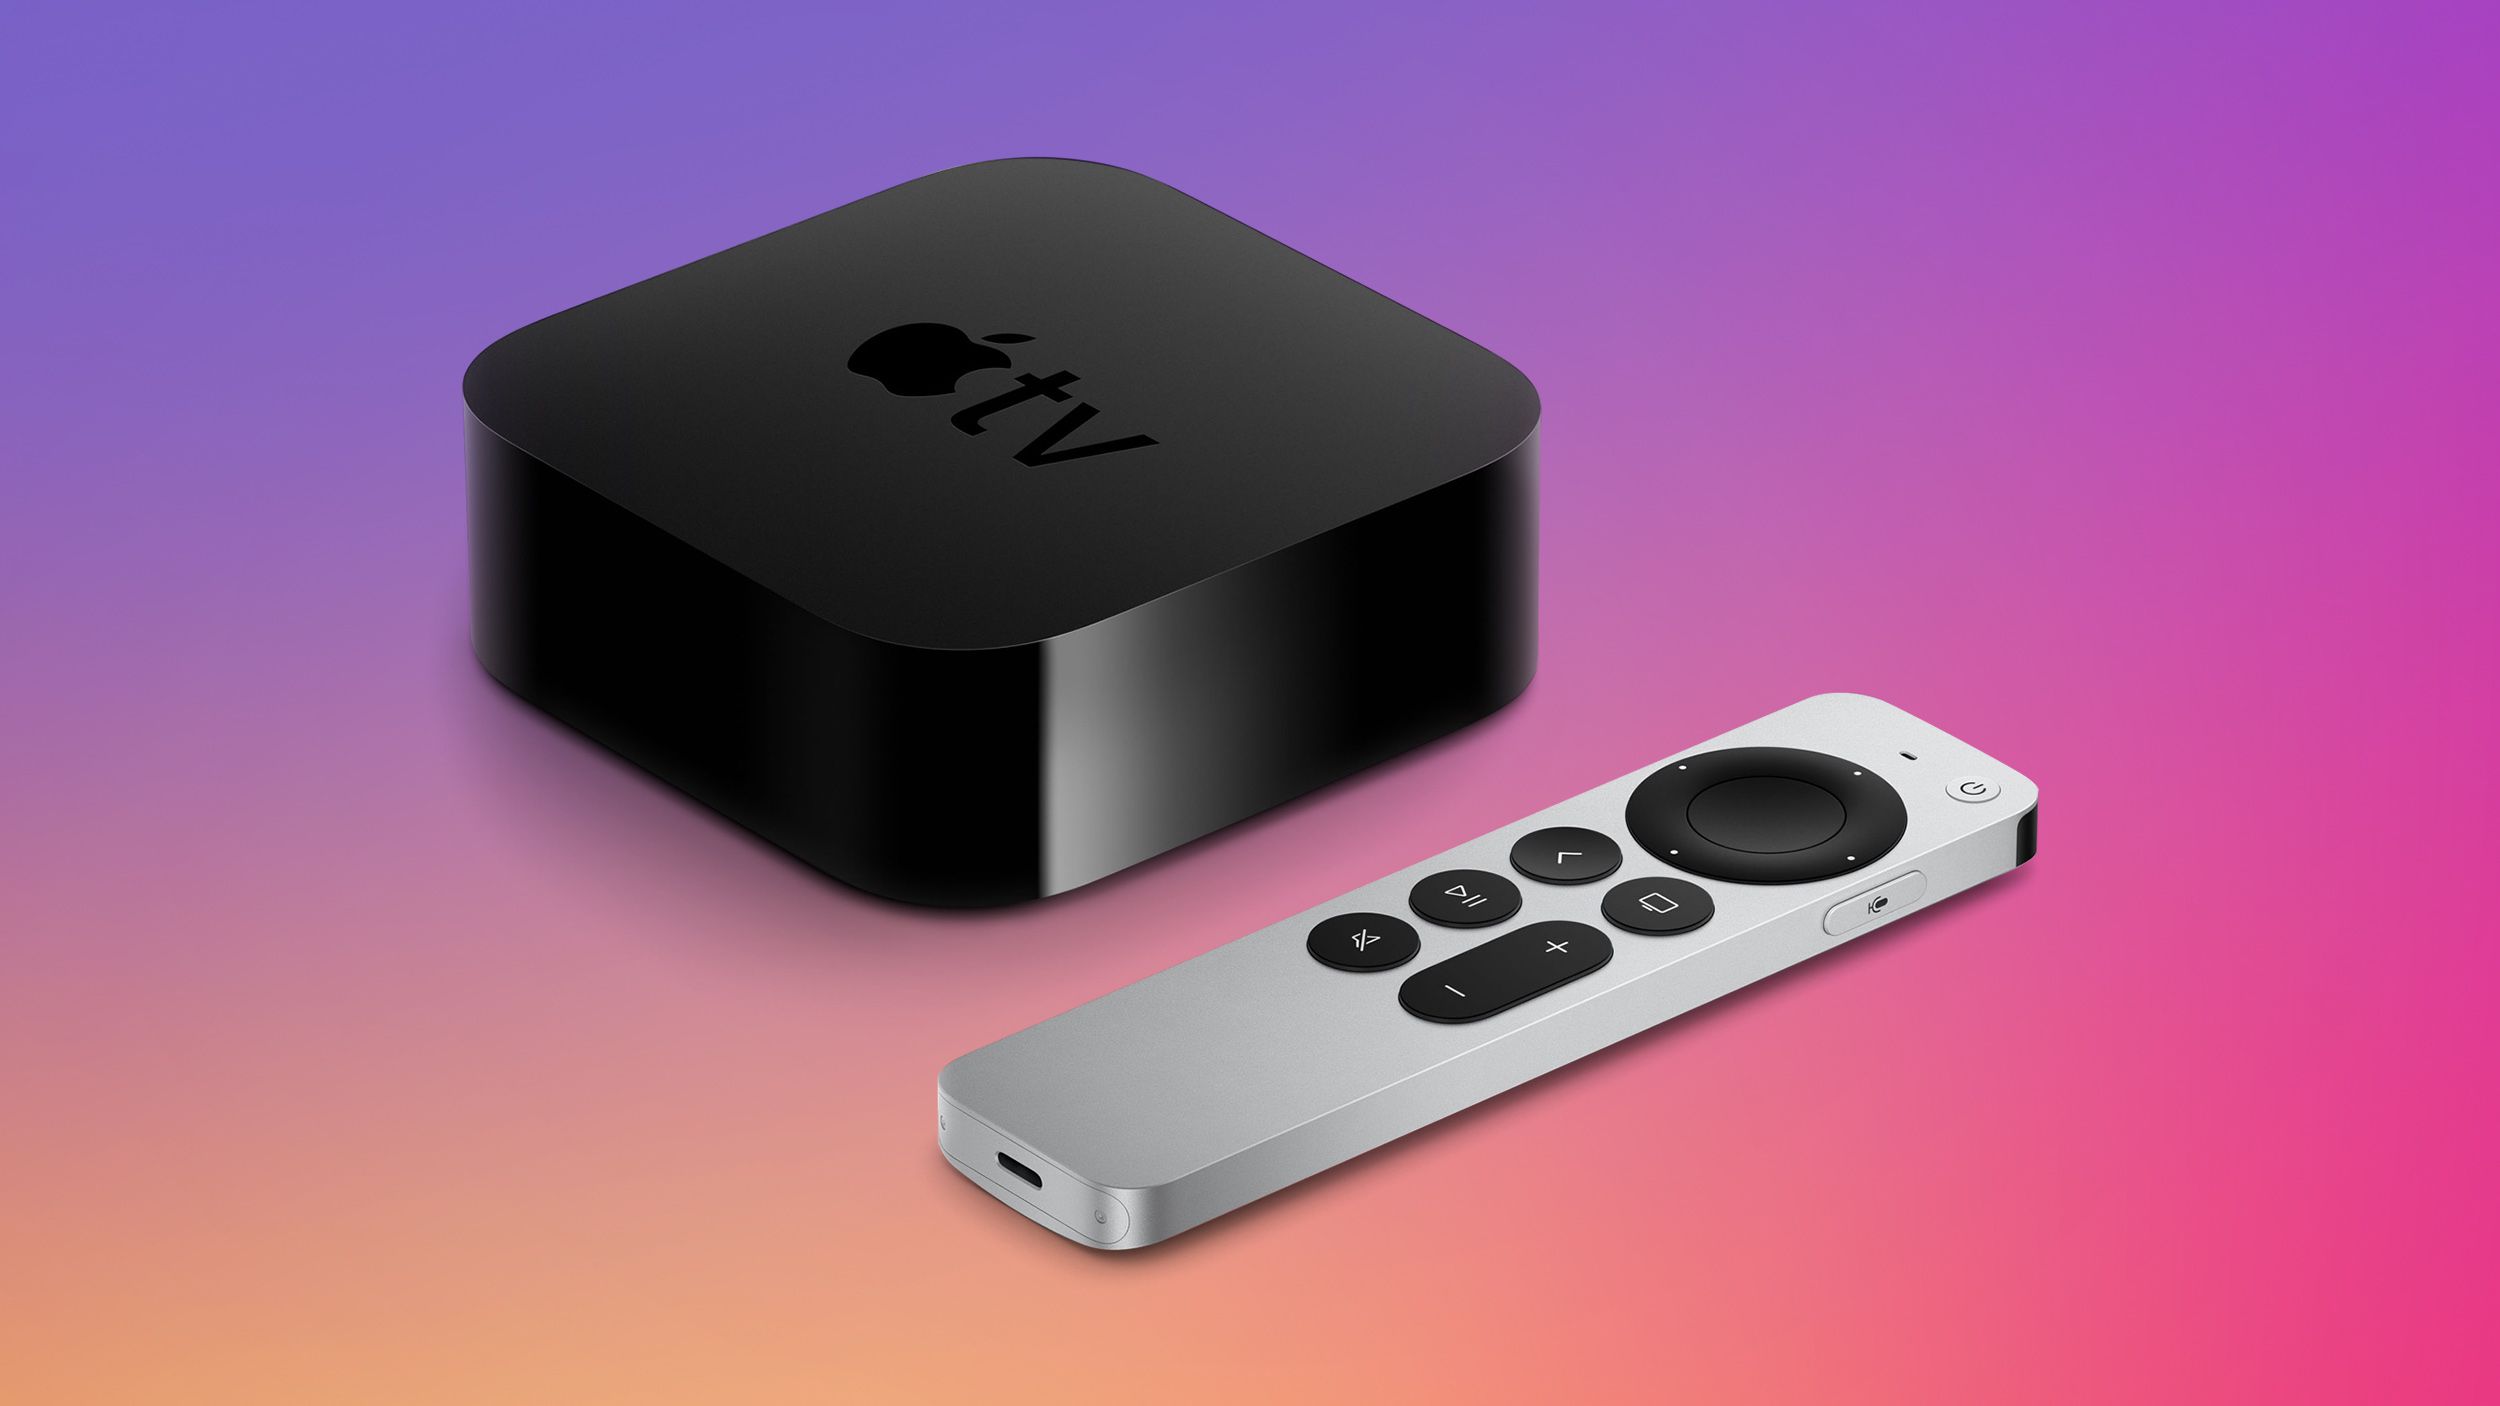 Fortov Ideel det tvivler jeg på New Apple TV Rumored to Launch in 2022 With These Four Features - MacRumors